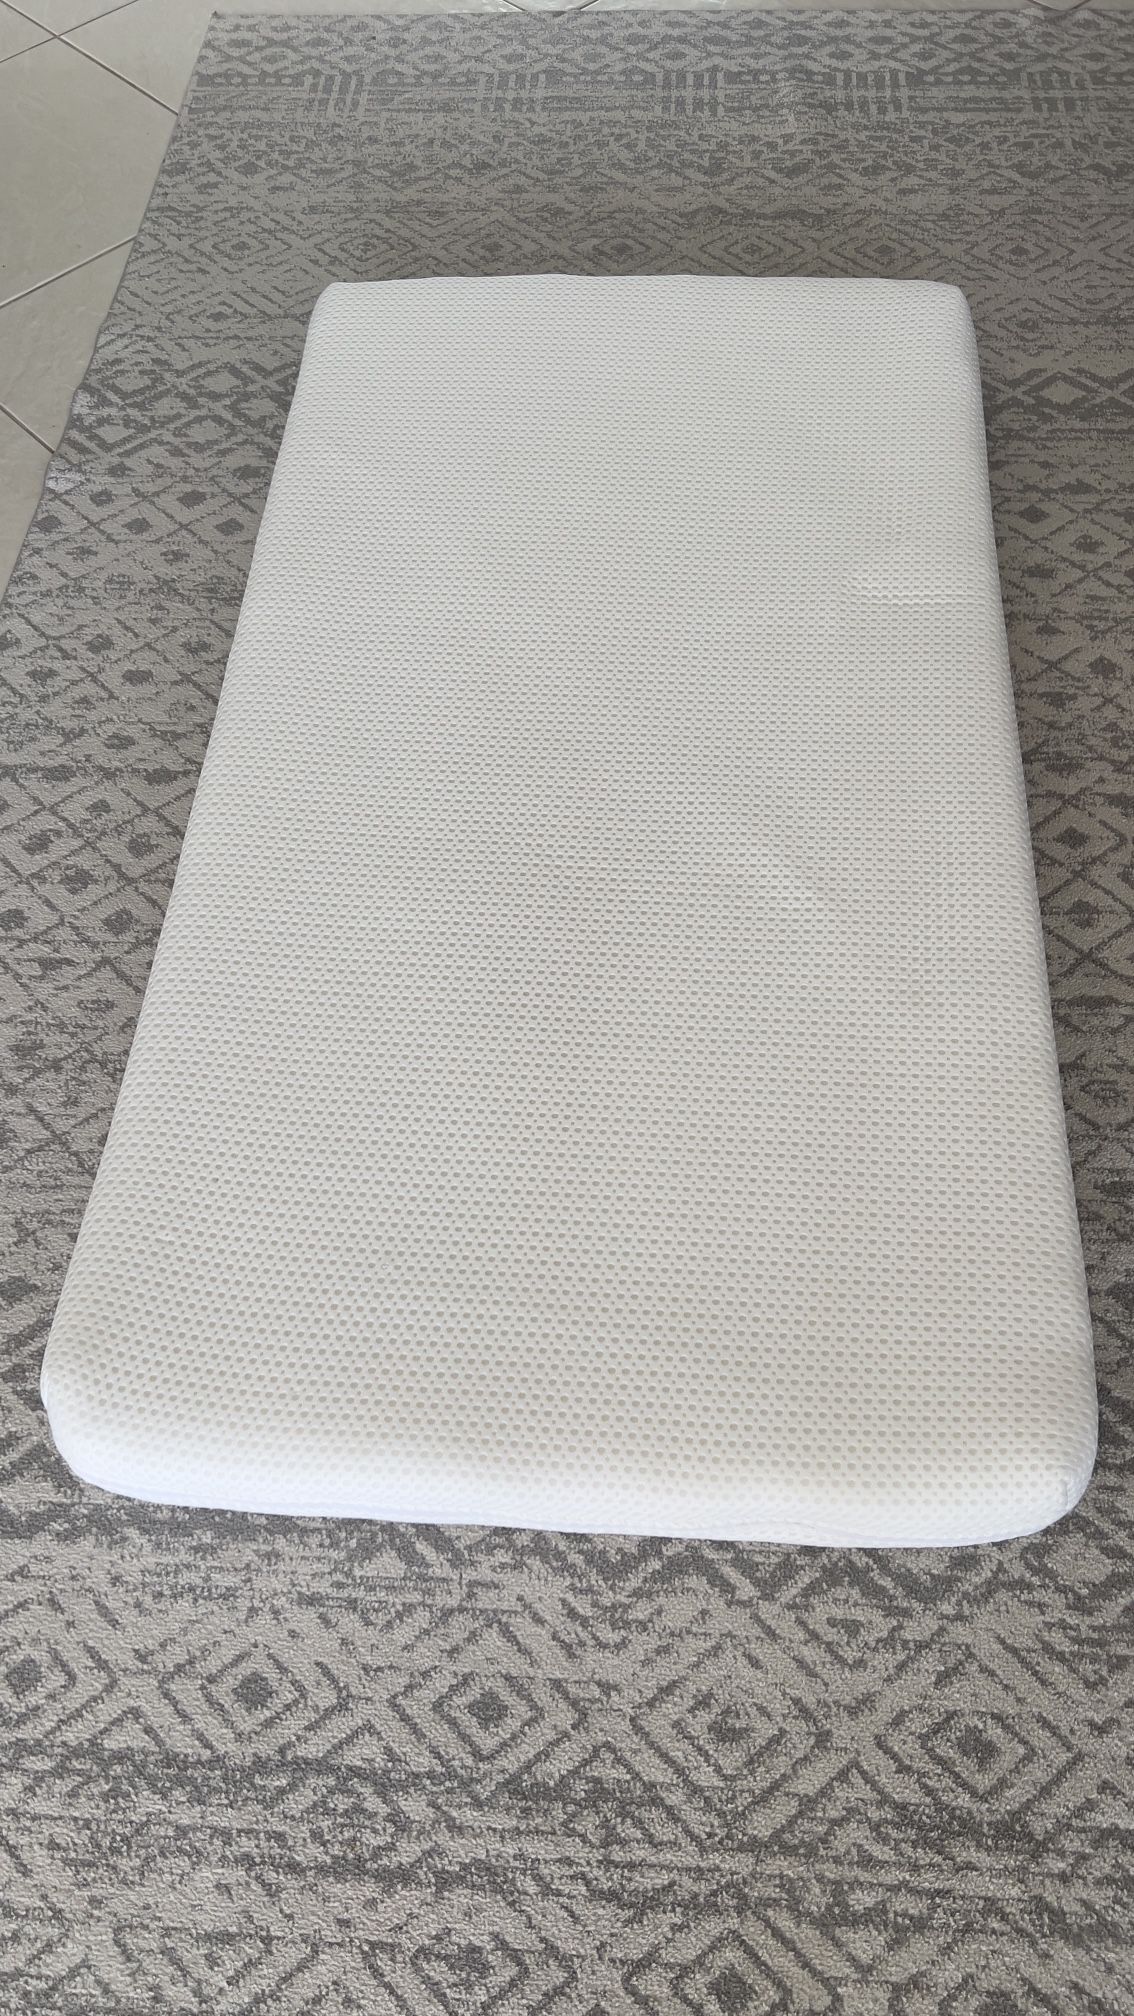 Crib Mattress | Baby Mattress for Crib, Dual-Layer, Safe, 100% Breathable & Machine Washable Infant Crib Mattress, Removable Cover, Thick Cushion, Whi